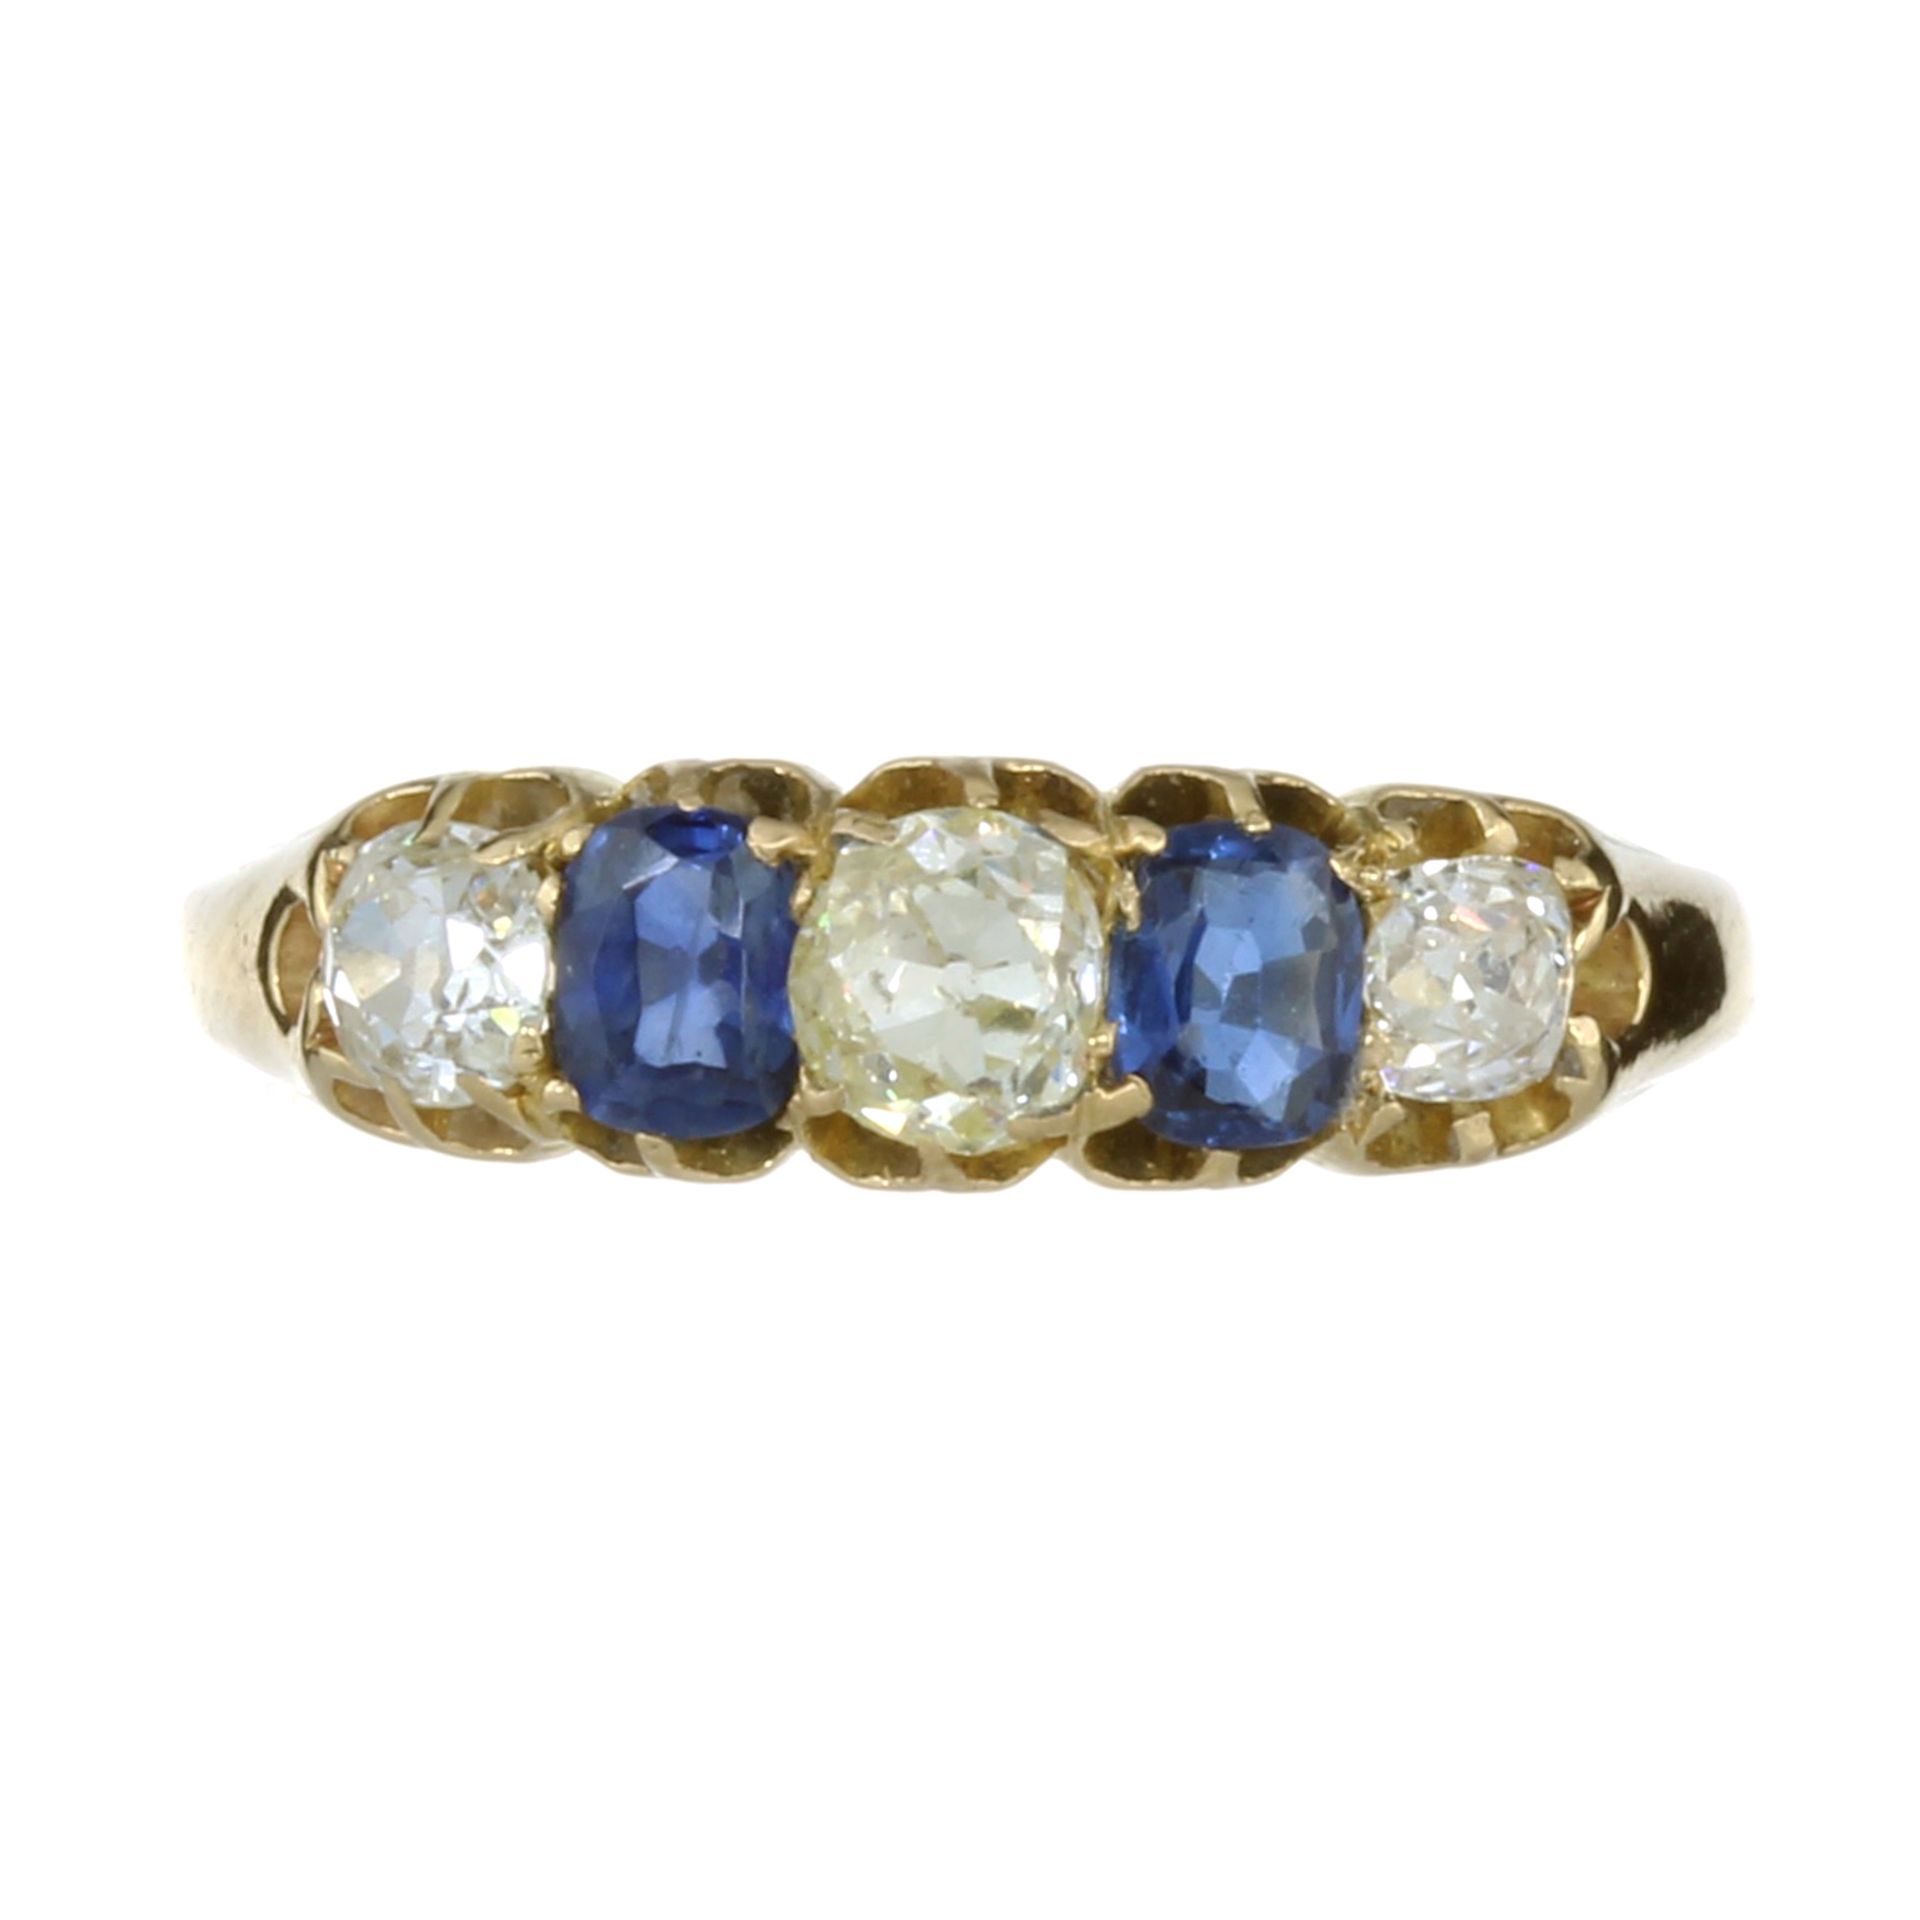 AN ANTIQUE DIAMOND AND BLUE SAPPHIRE FIVE STONE RING in high carat yellow gold set with a central